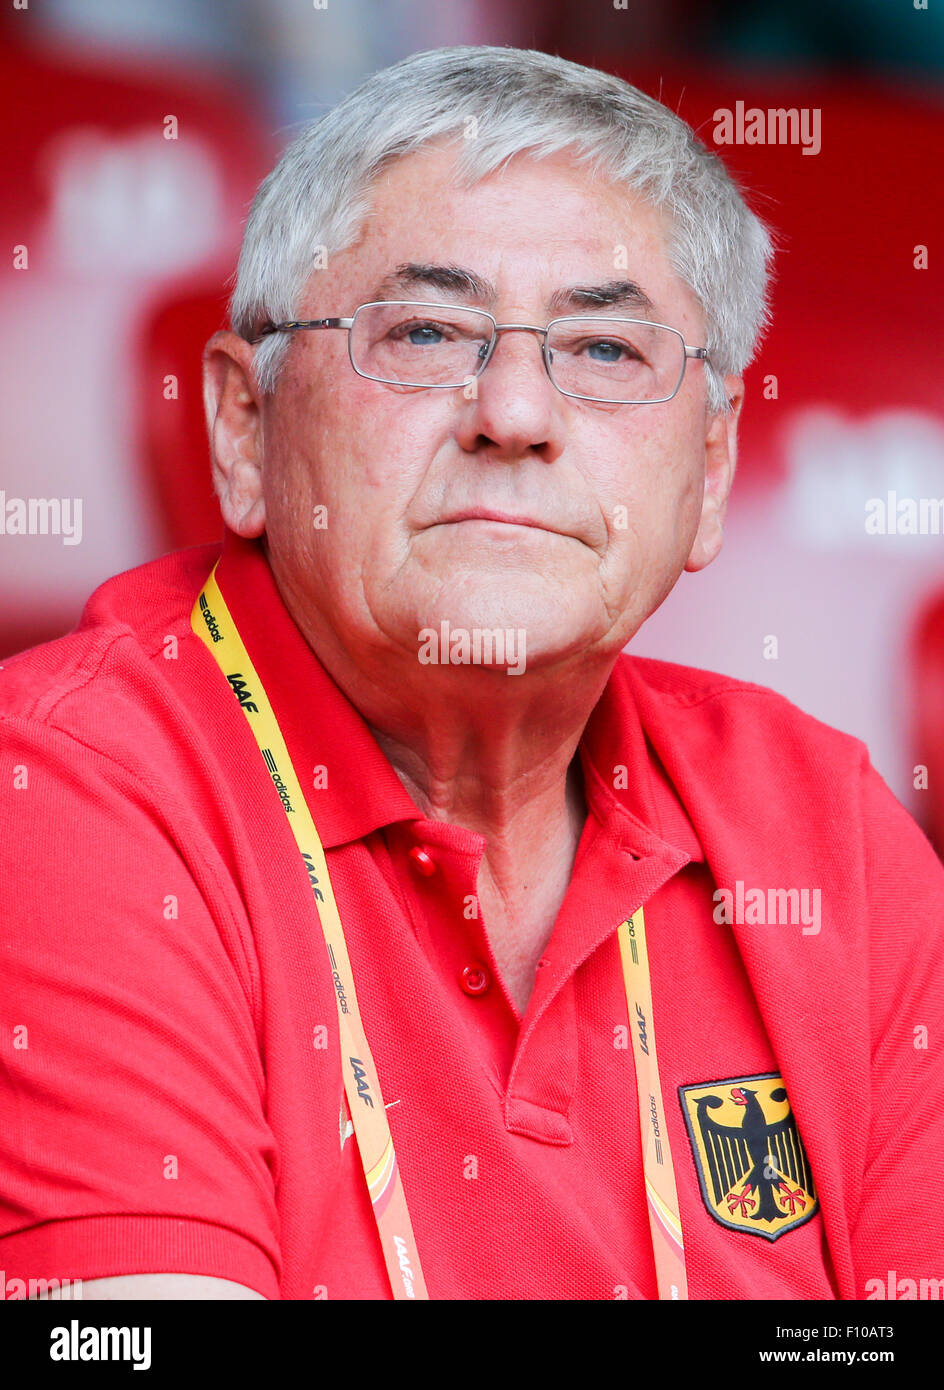 Germany&#39;s head coach of the Discus athletes, Werner Goldmann, pictured during the 15th International Association of Athletics Federations (IAAF) Athletics ... - beijing-china-24th-aug-2015-germanys-head-coach-of-the-discus-athletes-F10AT3